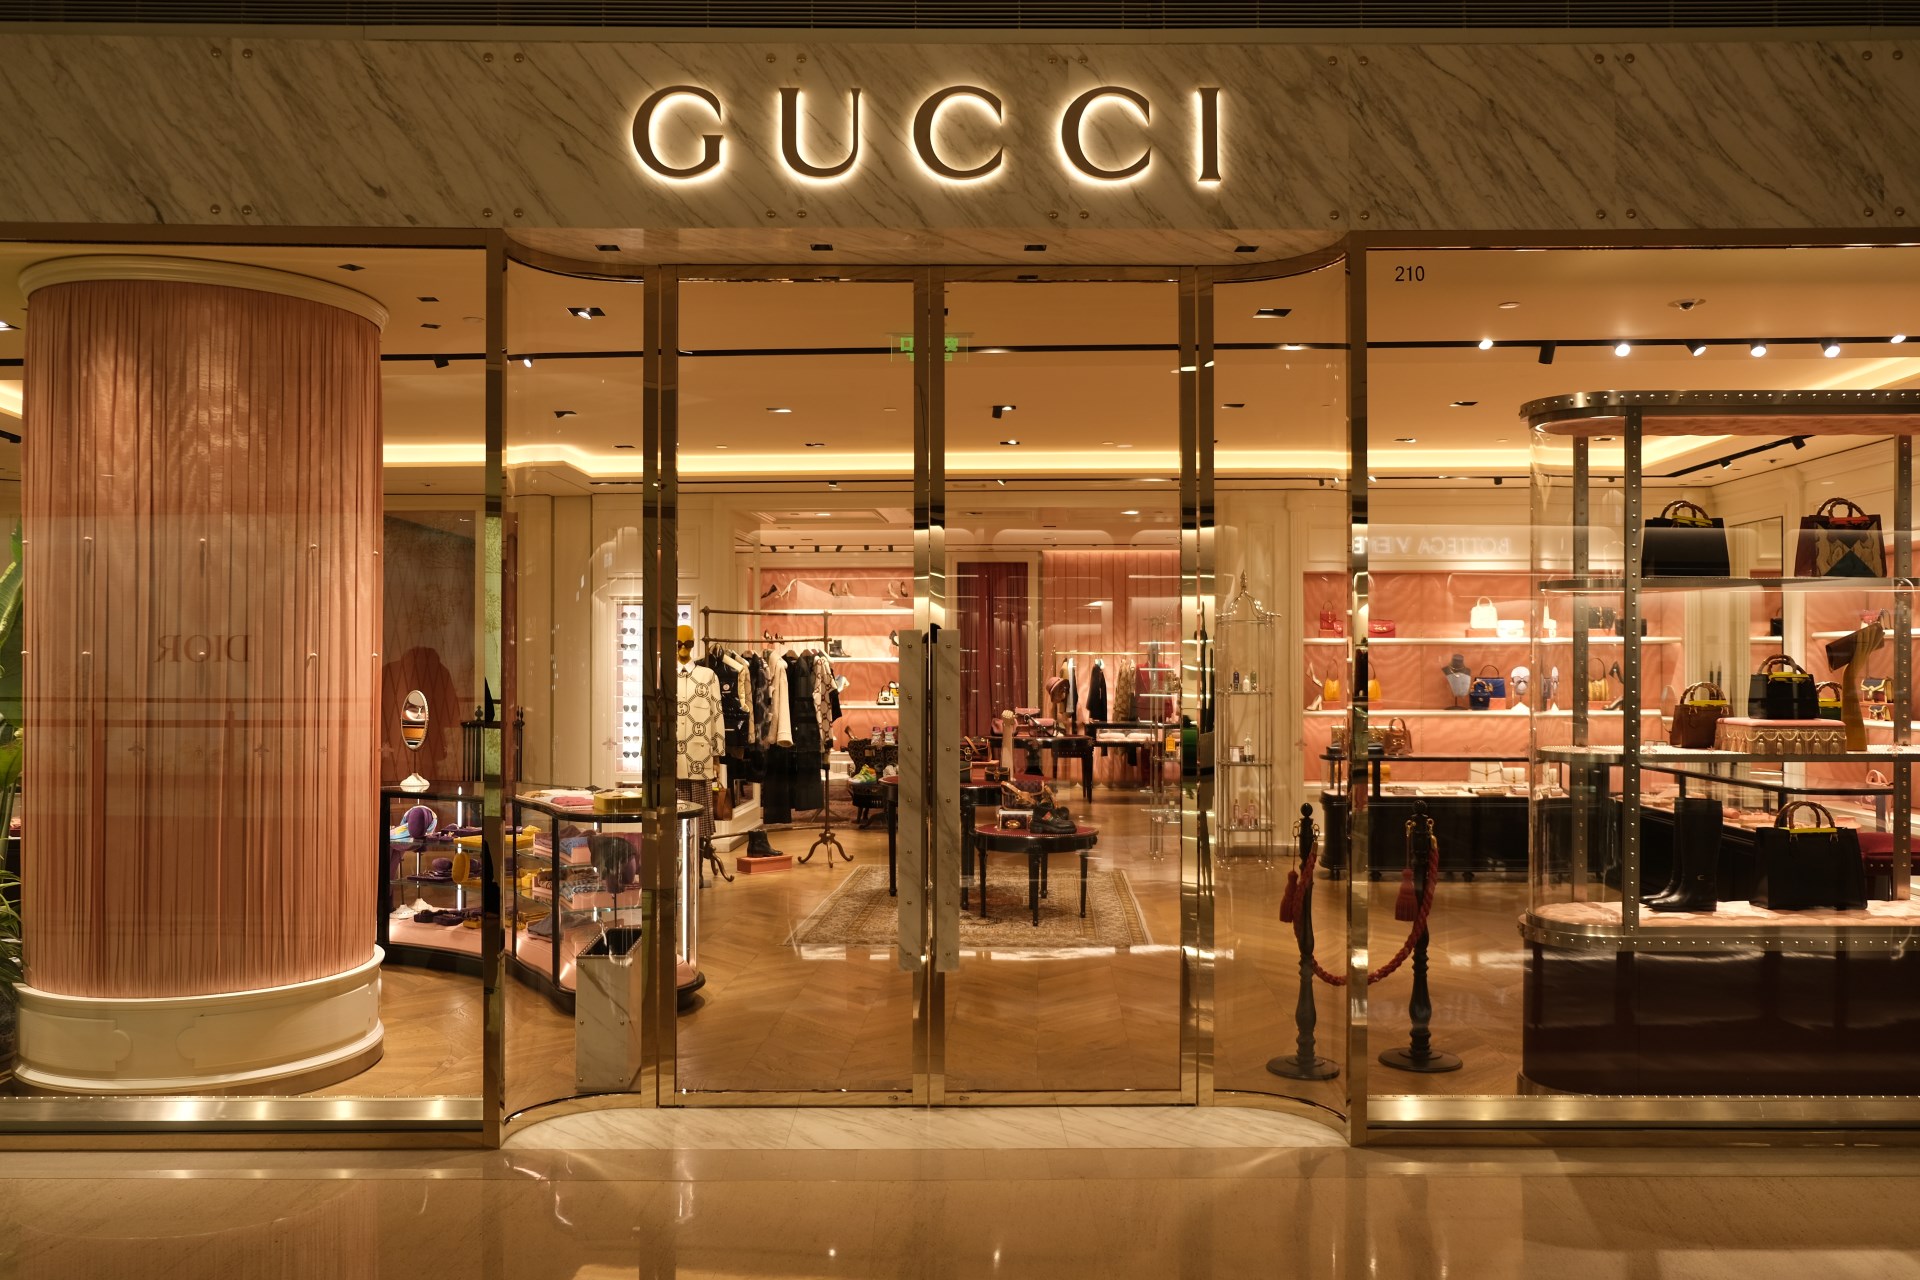 The foundation of the Gucci fashion house